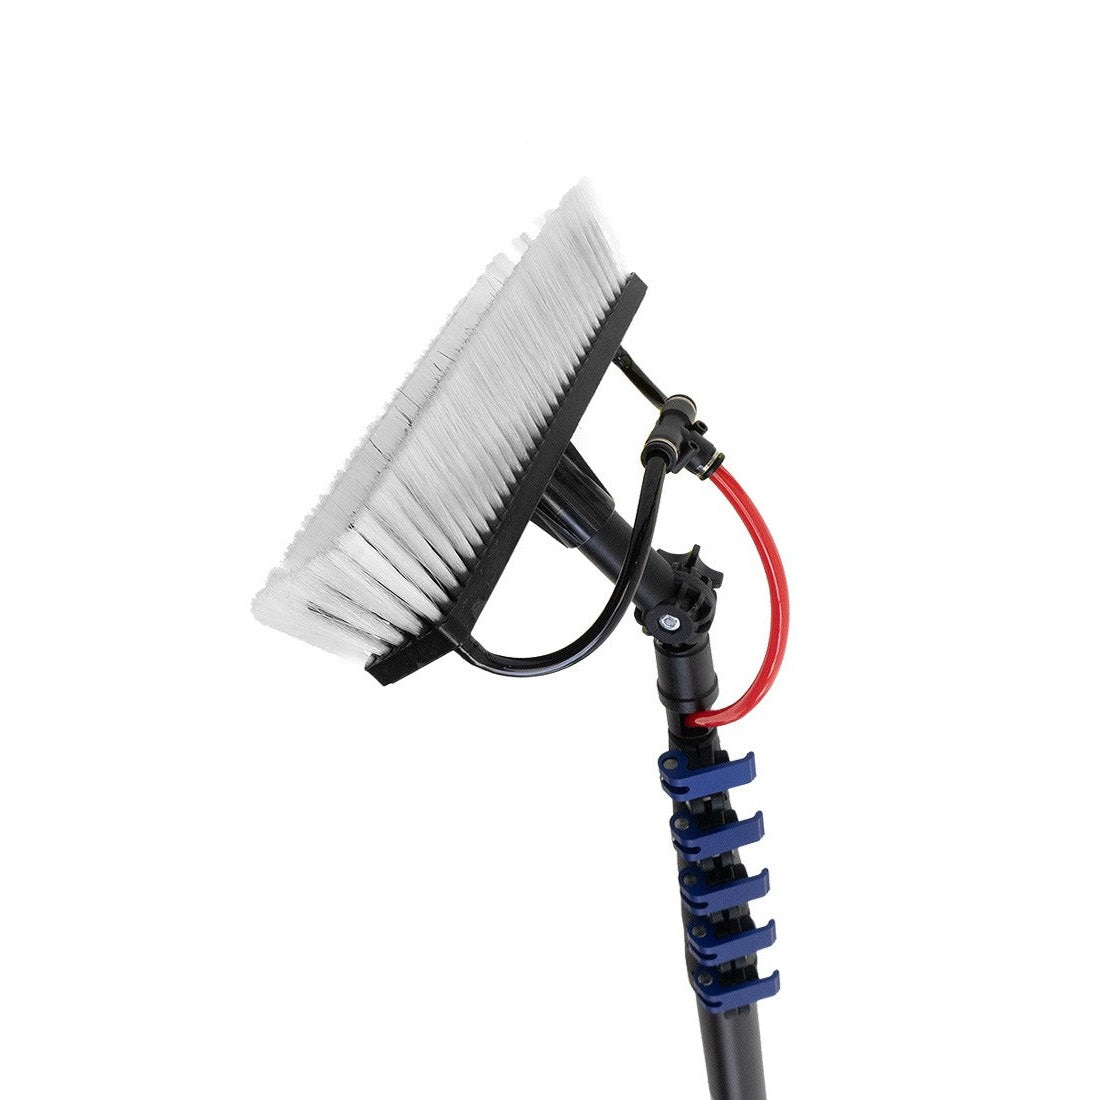 Window Cleaning Brushes & Poles, Window Cleaning Equipment